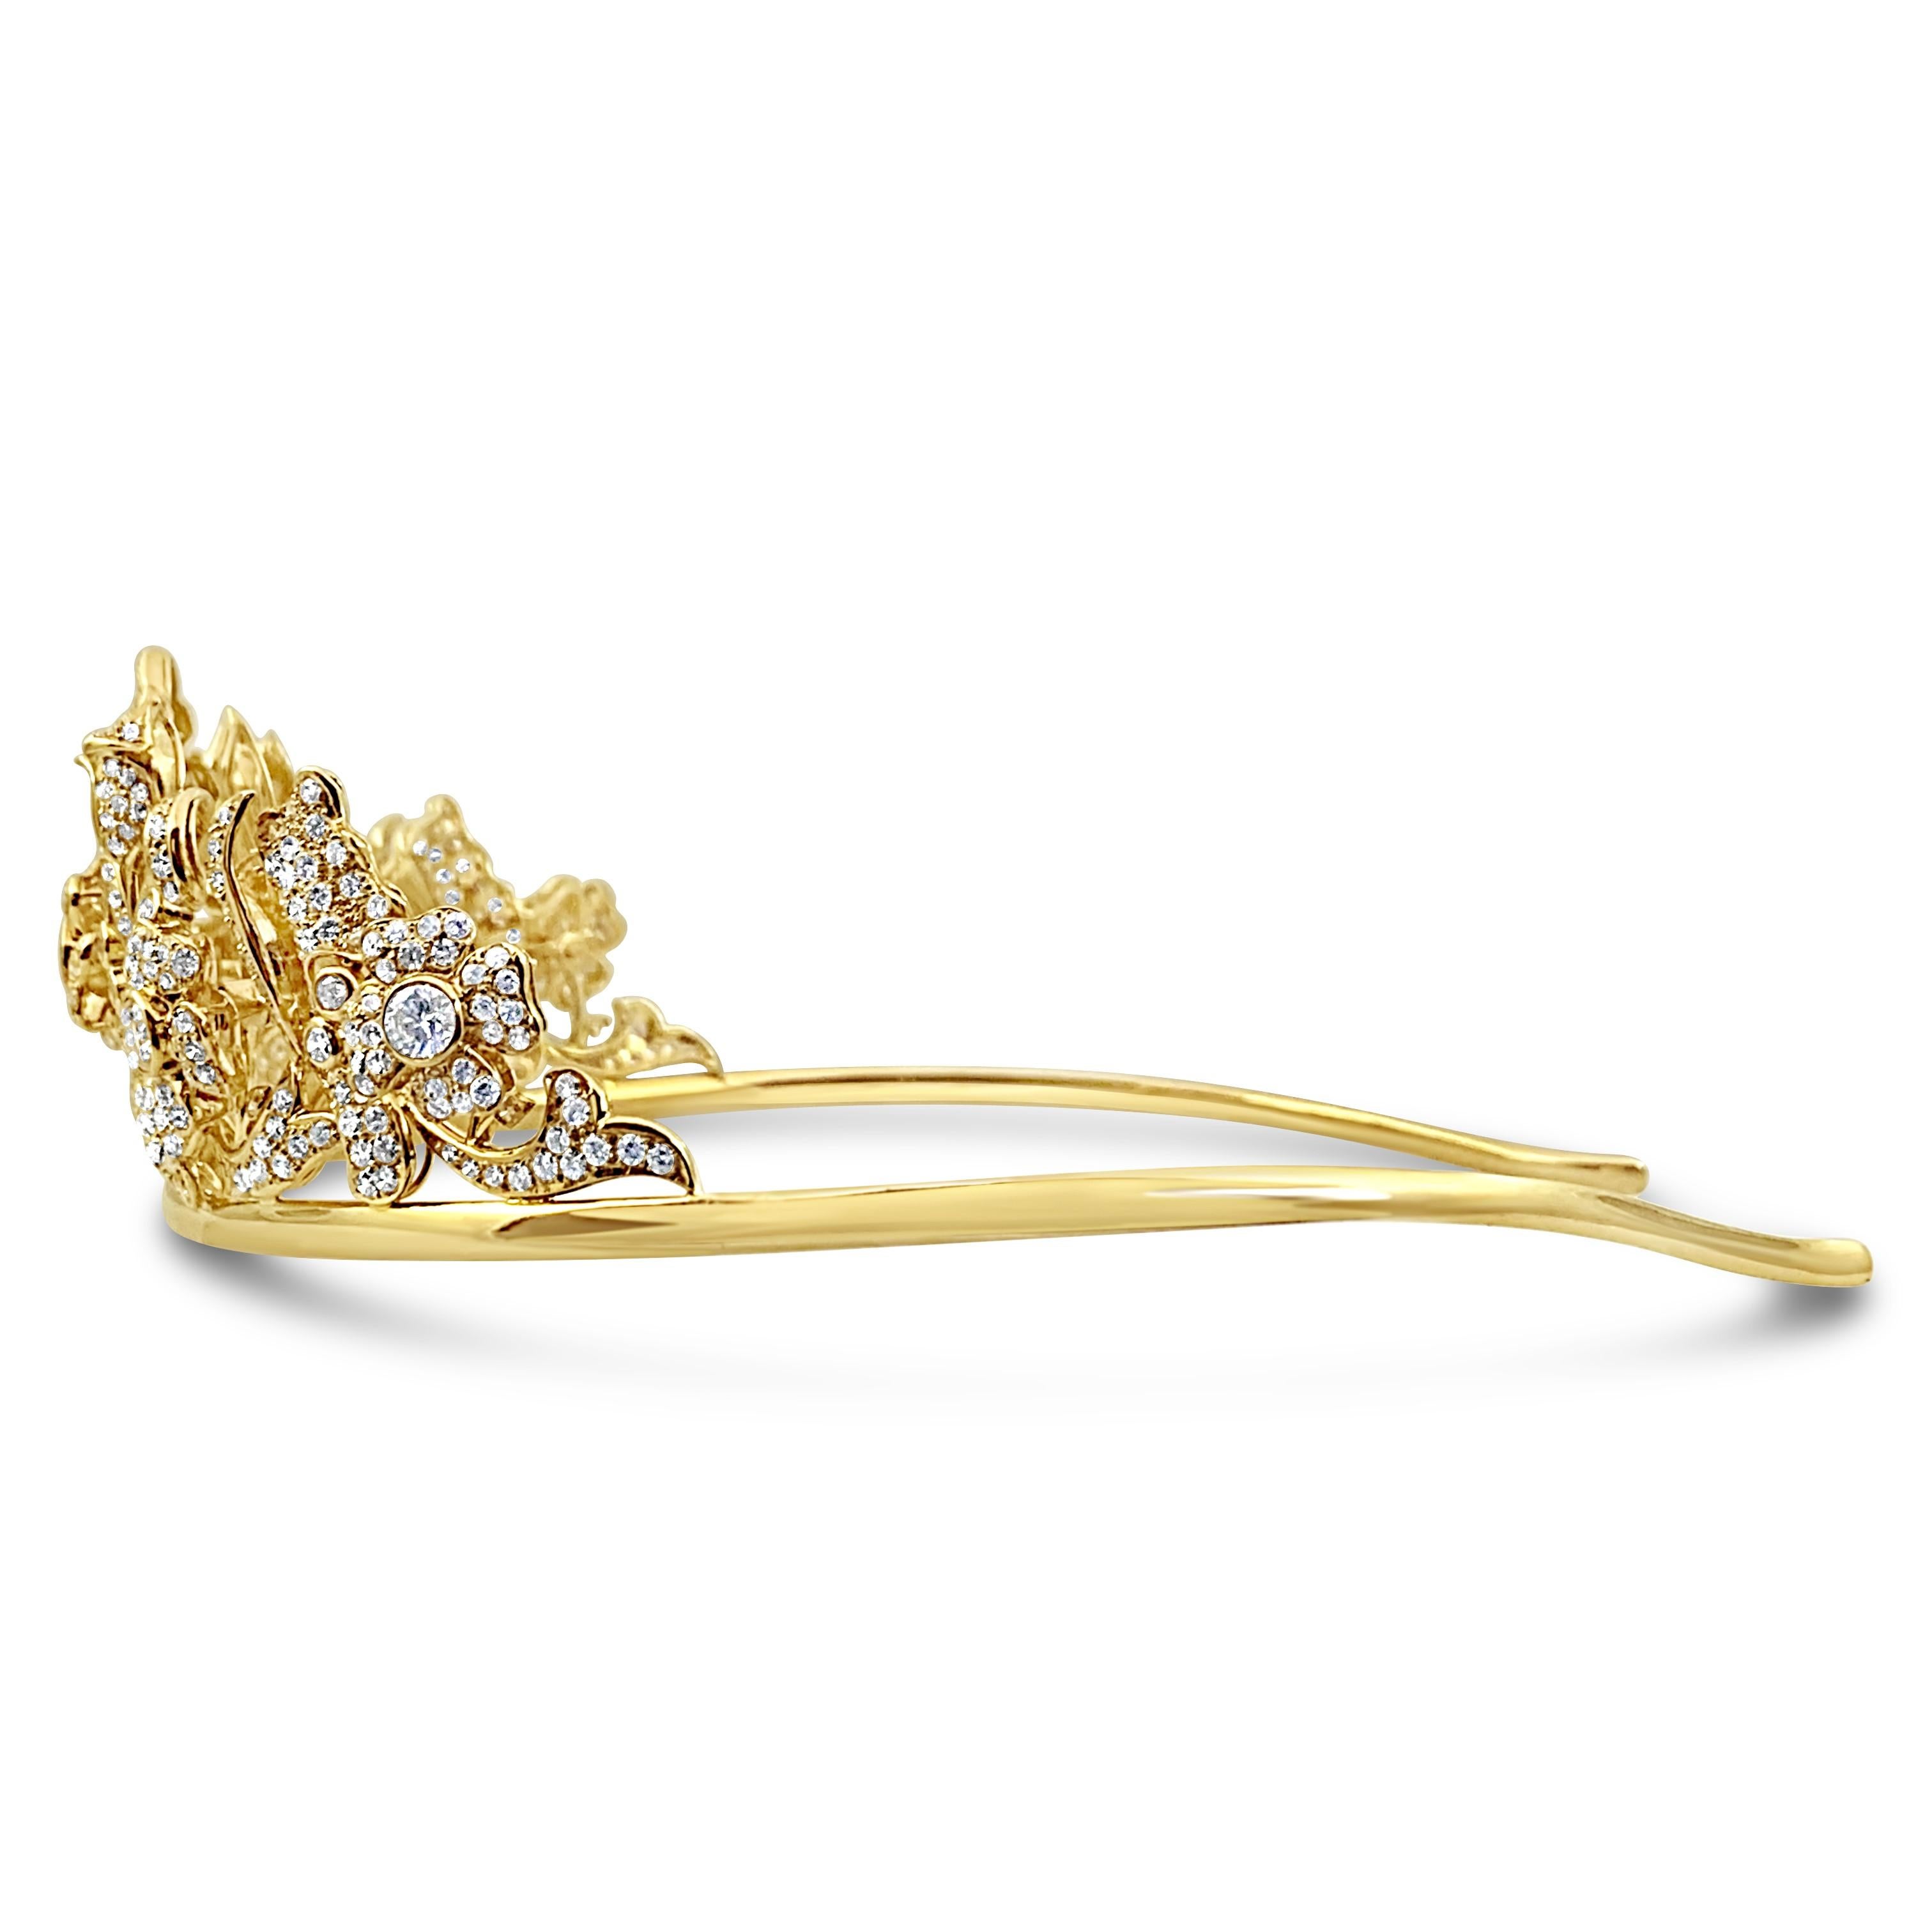 A unique gold diamond tiara with floral motifs, featuring approximately 23 carats set in 18Kt gold. The 6 center diamonds weigh approximately 5 carats, and are F-G color VS1 Clarity. 
Tiara Details 
Total Weight- 96 grams
Dimensions- 50 mm (Height)